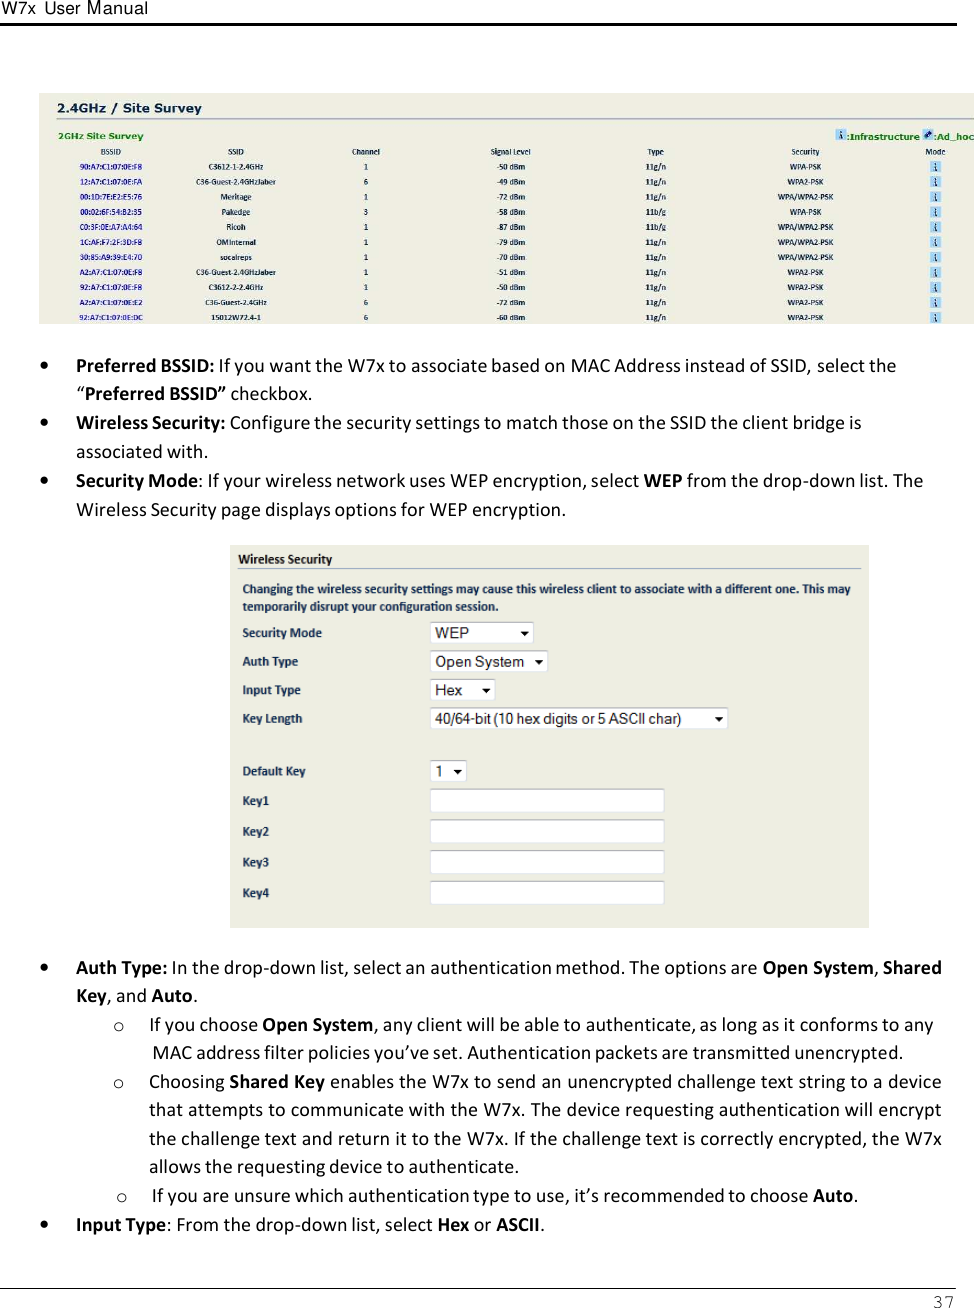 W7x  User Manual 37        •   Preferred BSSID: If you want the W7x to associate based on MAC Address instead of SSID, select the “Preferred BSSID” checkbox. •   Wireless Security: Configure the security settings to match those on the SSID the client bridge is associated with. •   Security Mode: If your wireless network uses WEP encryption, select WEP from the drop-down list. The Wireless Security page displays options for WEP encryption.    •   Auth Type: In the drop-down list, select an authentication method. The options are Open System, Shared Key, and Auto. o  If you choose Open System, any client will be able to authenticate, as long as it conforms to any MAC address filter policies you’ve set. Authentication packets are transmitted unencrypted. o  Choosing Shared Key enables the W7x to send an unencrypted challenge text string to a device that attempts to communicate with the W7x. The device requesting authentication will encrypt the challenge text and return it to the W7x. If the challenge text is correctly encrypted, the W7x allows the requesting device to authenticate. o  If you are unsure which authentication type to use, it’s recommended to choose Auto. •   Input Type: From the drop-down list, select Hex or ASCII. 